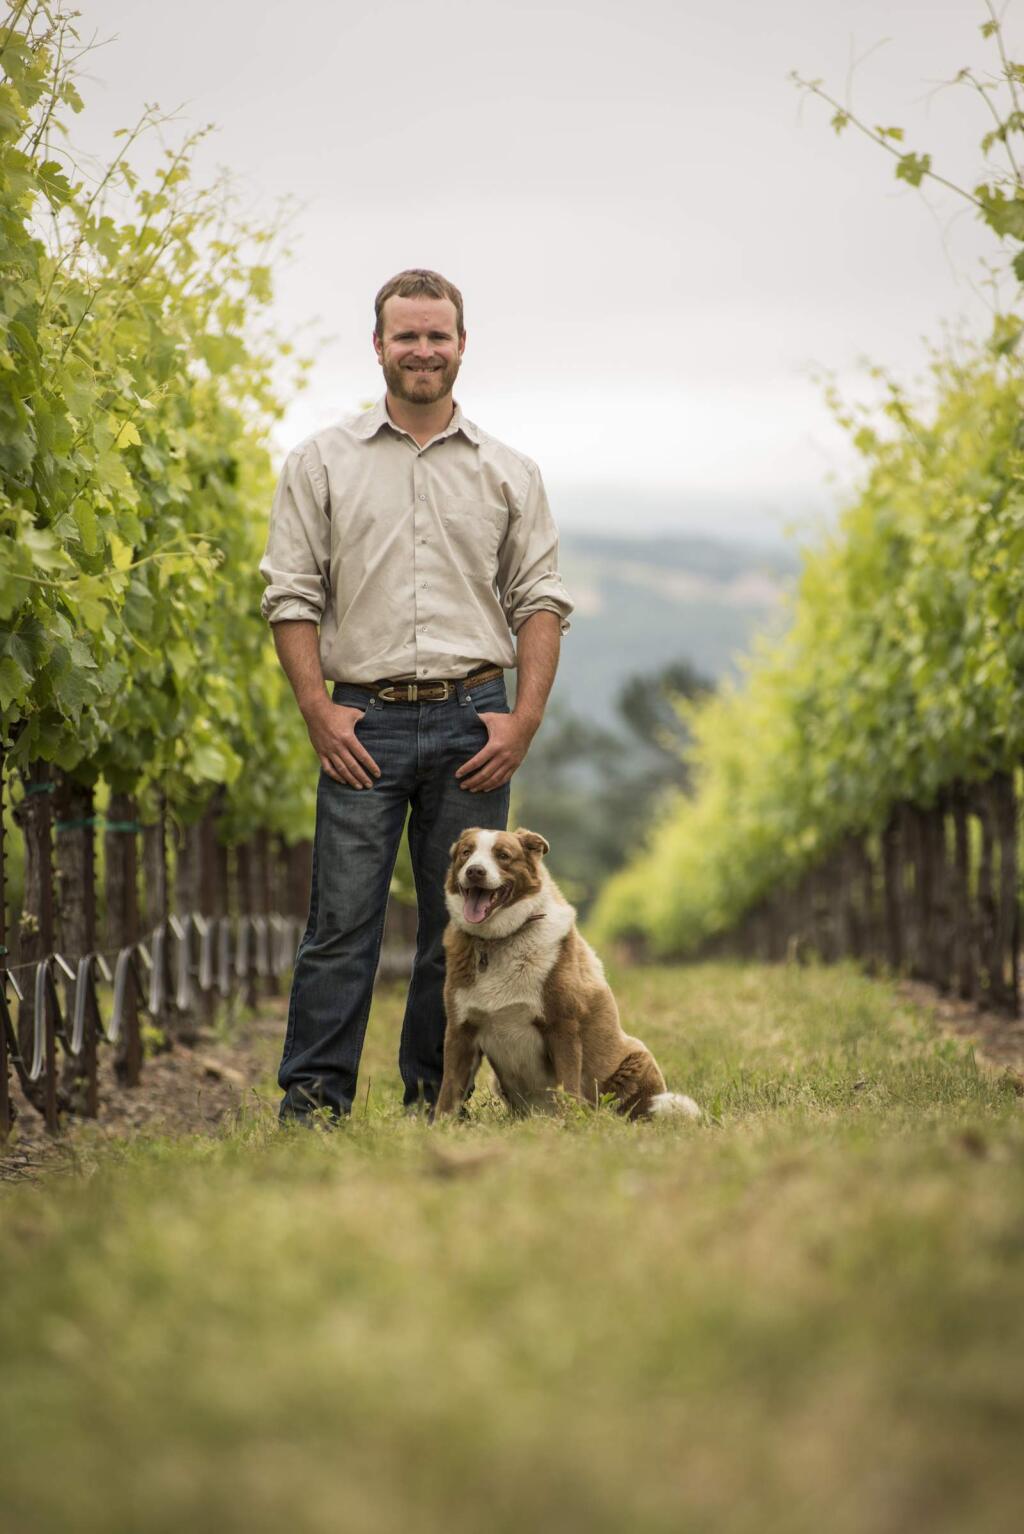 Jake Terrell, vineyard manager of St. Francis Winery & Vineyards in Santa Rosa, is among North Bay Business Journal's 2017 Forty Under 40 list of remarkable professionals younger than 40. (TIMM EUBANKS, May 25, 2016)